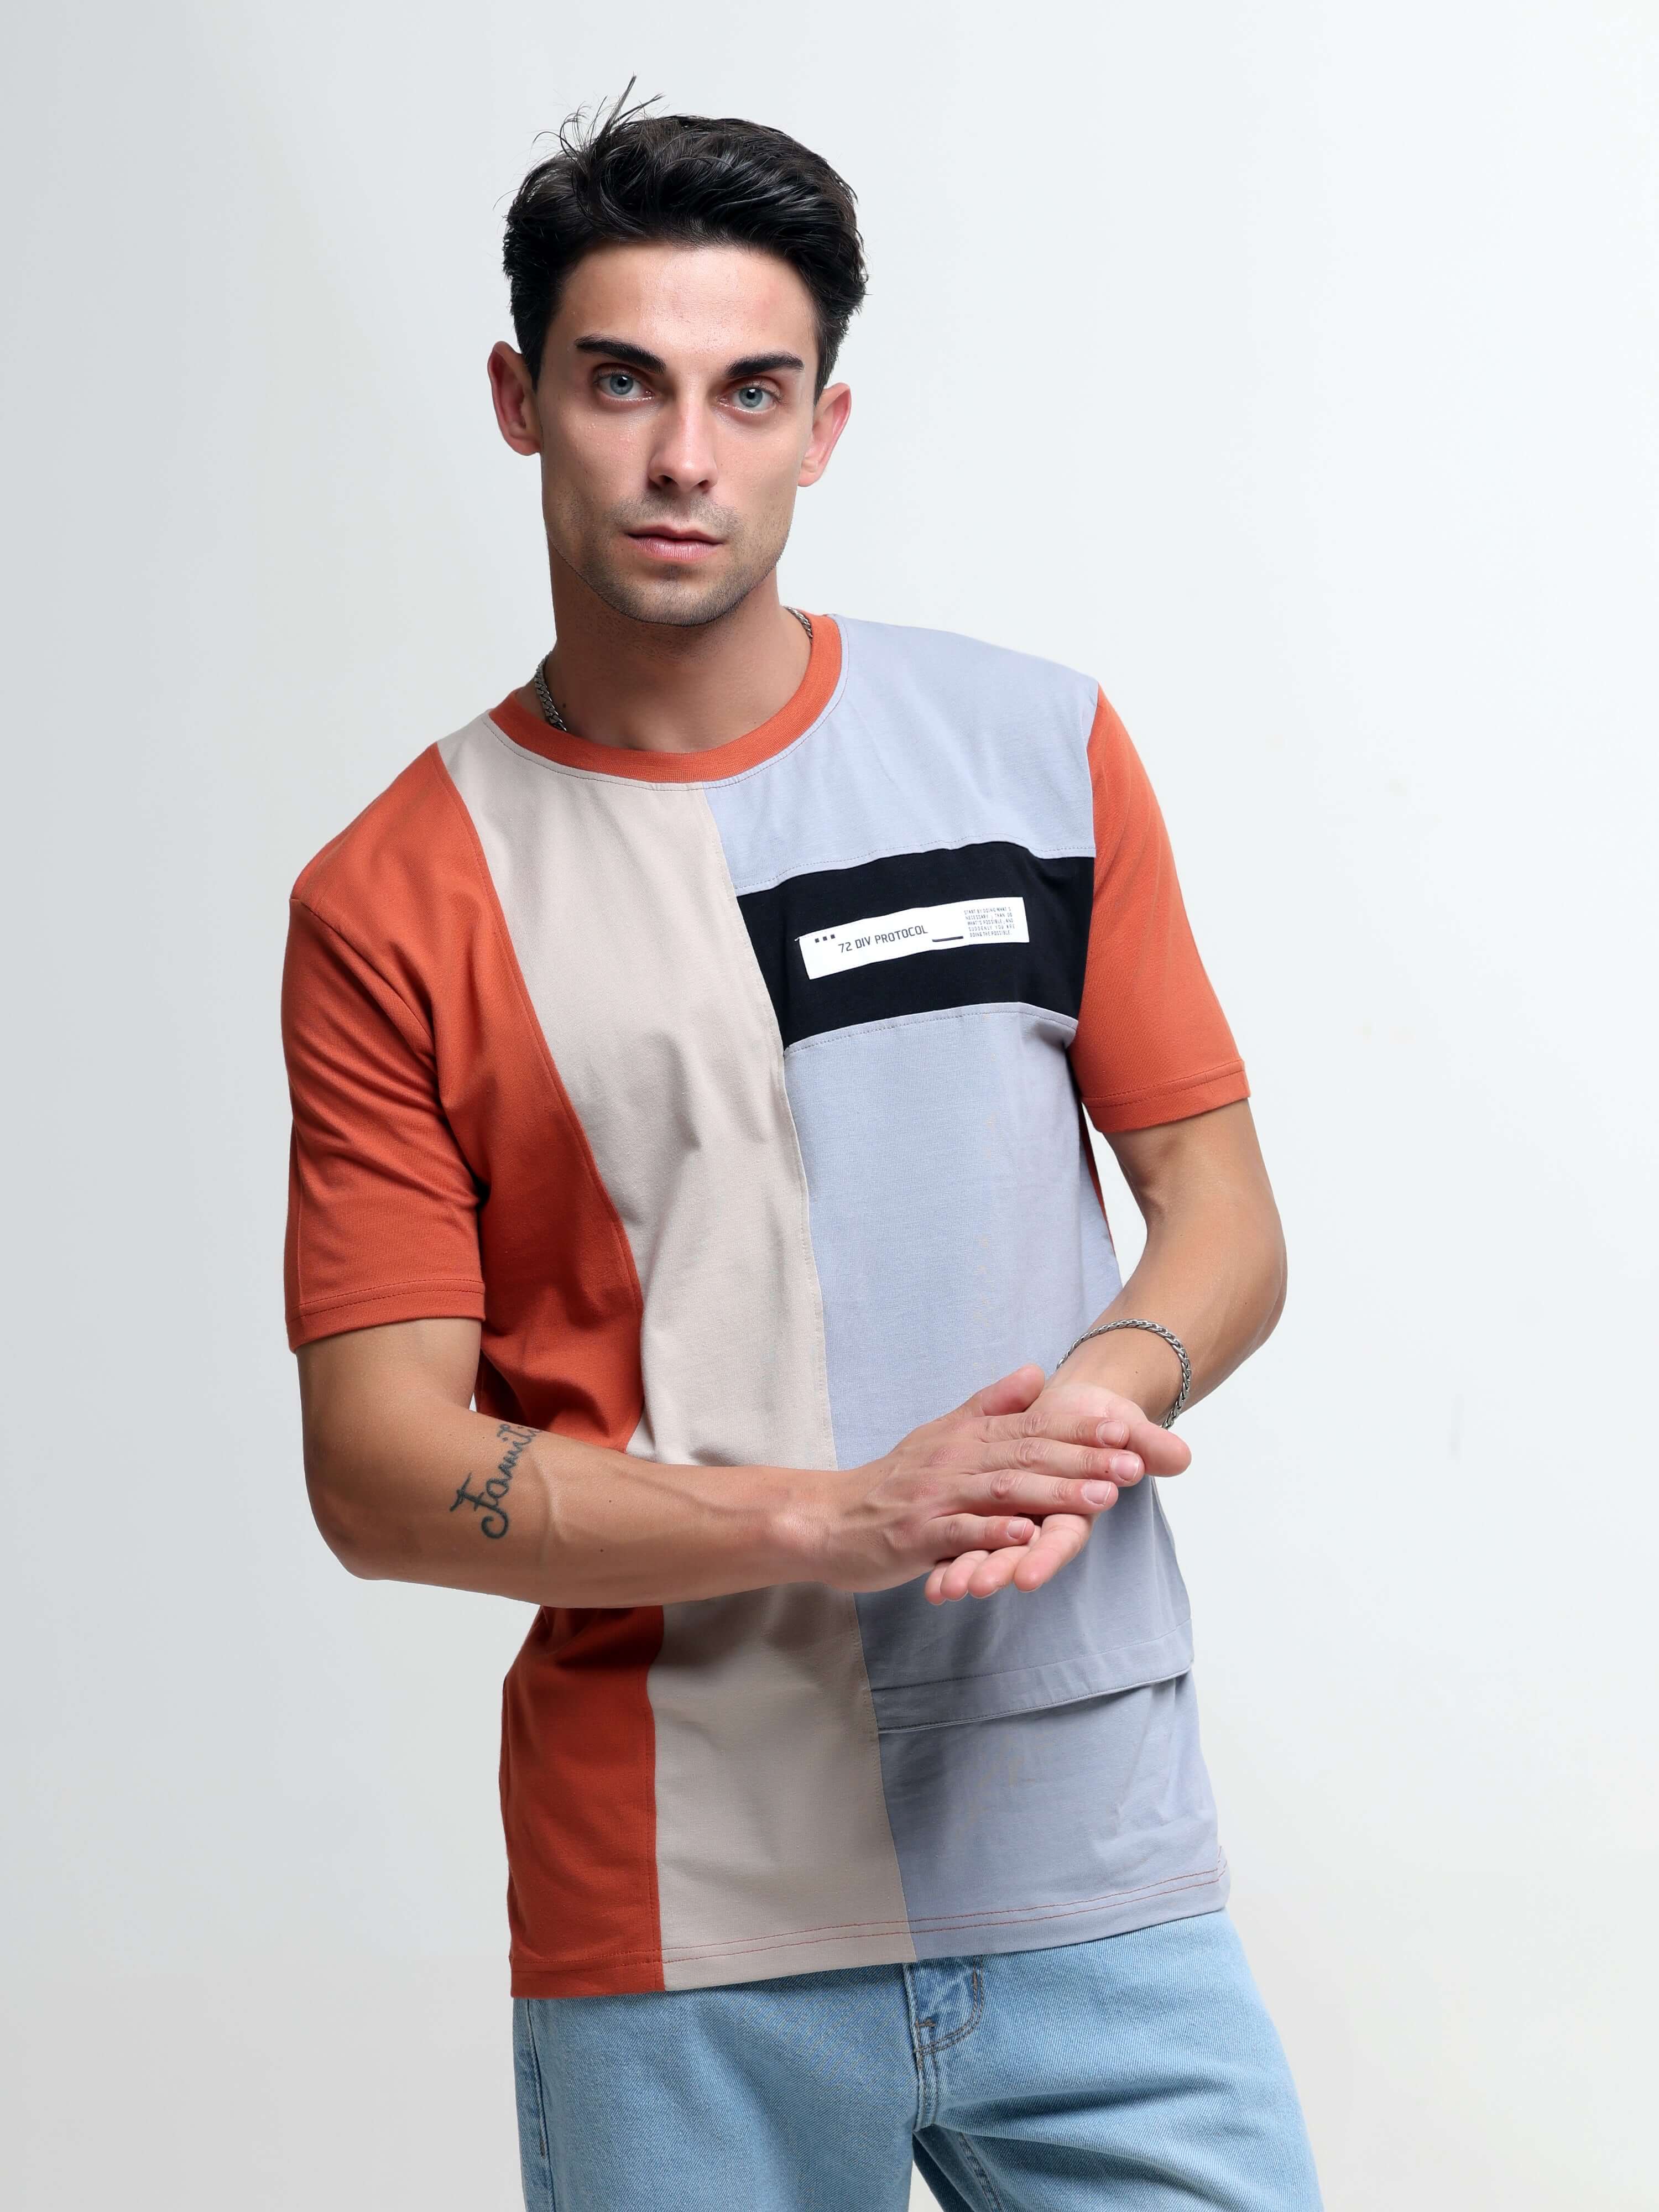 Ignite tangy orange light weight tshirt shop online at Estilocus. This relax-fit Cut and Sew T-shirt is comfortable and the perfect essential all year round. Pair it with white jeans and sneakers and layer it up with a denim jacket for a casual and put-to